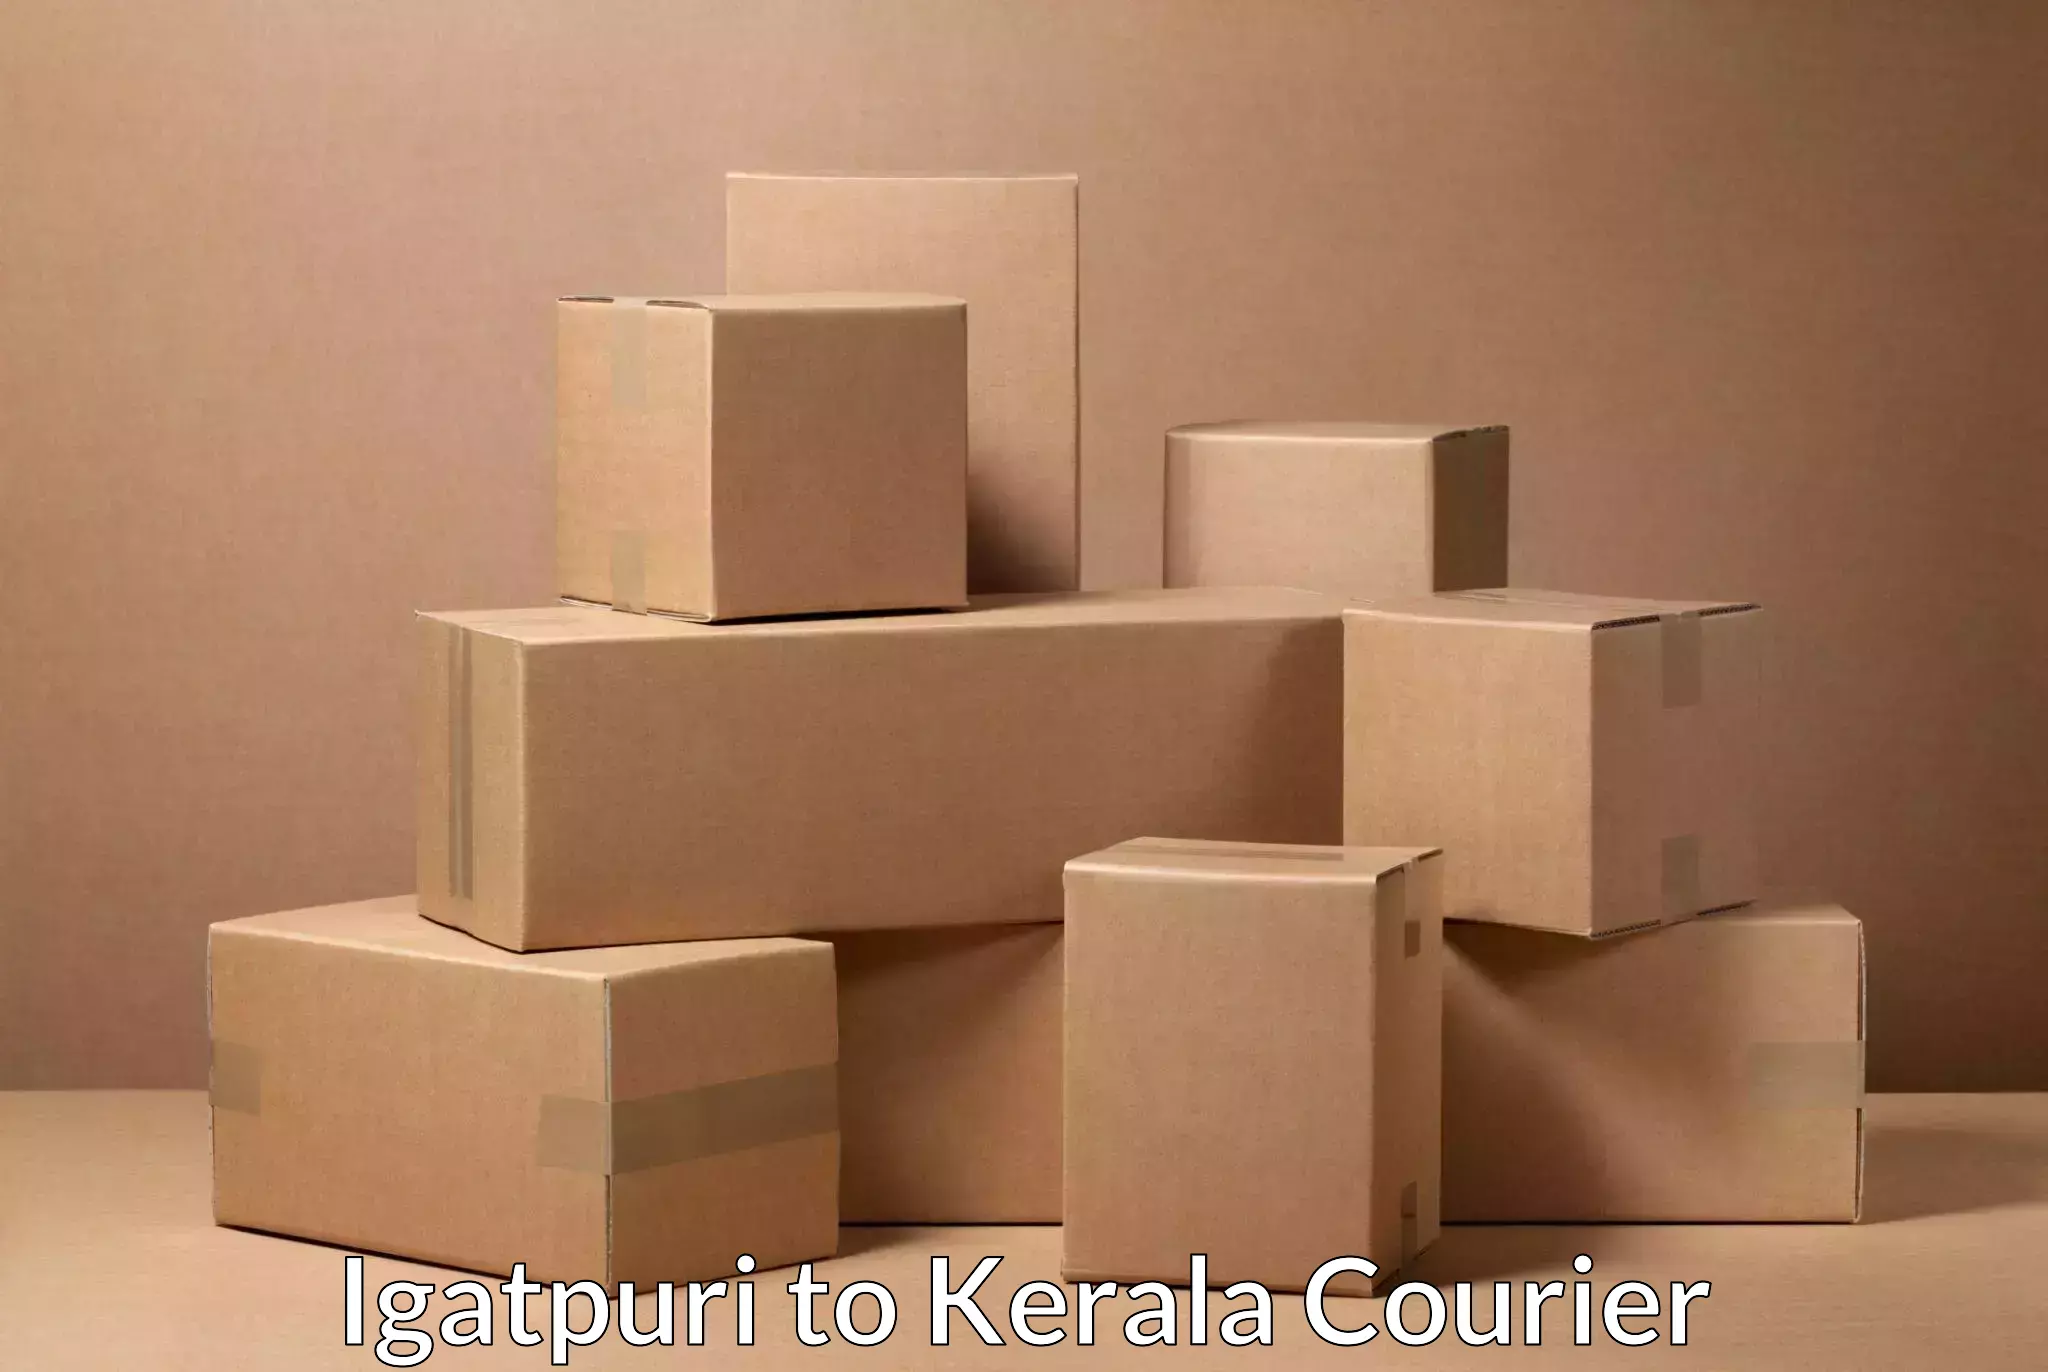 Nationwide courier service Igatpuri to Kerala